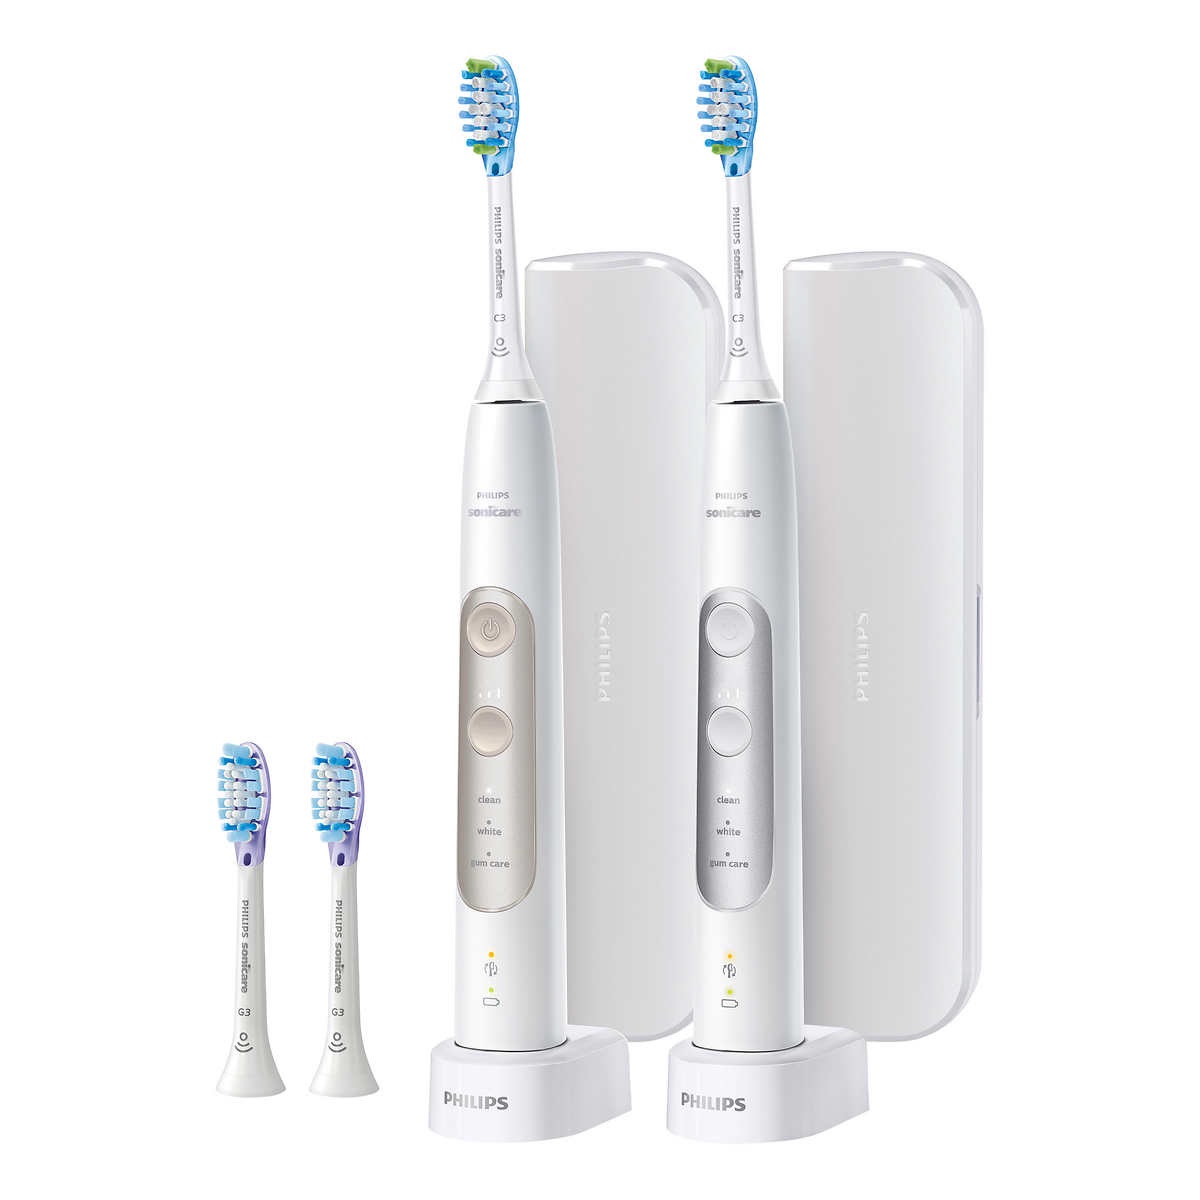 Philips Sonicare PerfectClean Rechargeable Electric Toothbrush电动牙刷, 2-pack  | Costco